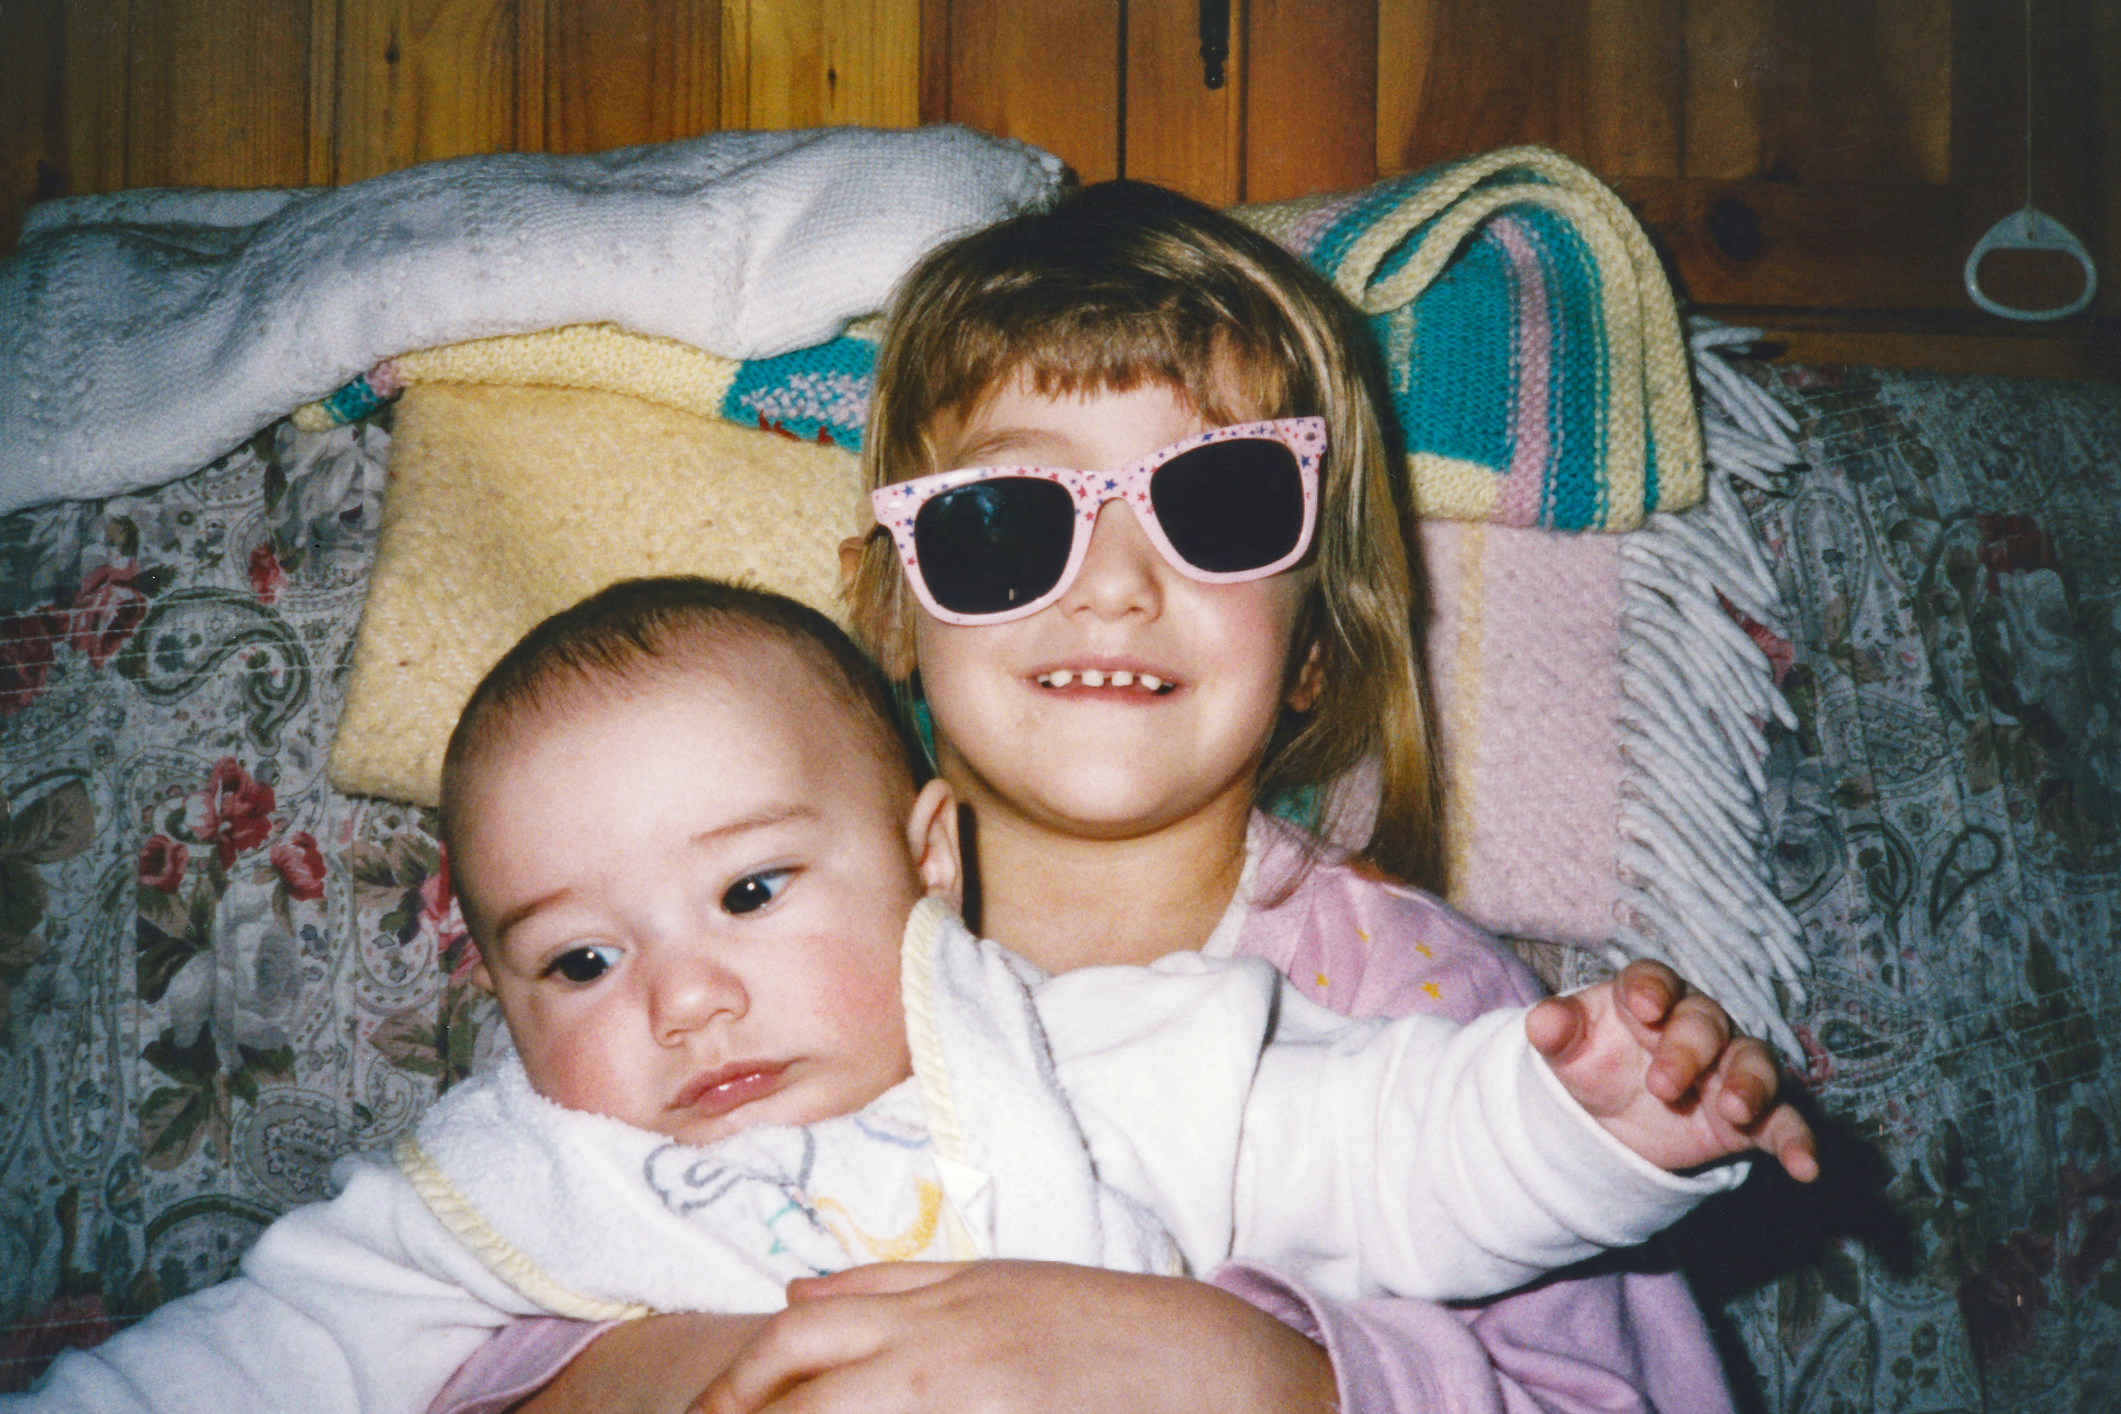 A vintage picture of two young children embracing, one wearing heart-shaped sunglasses, in a warm sibling moment